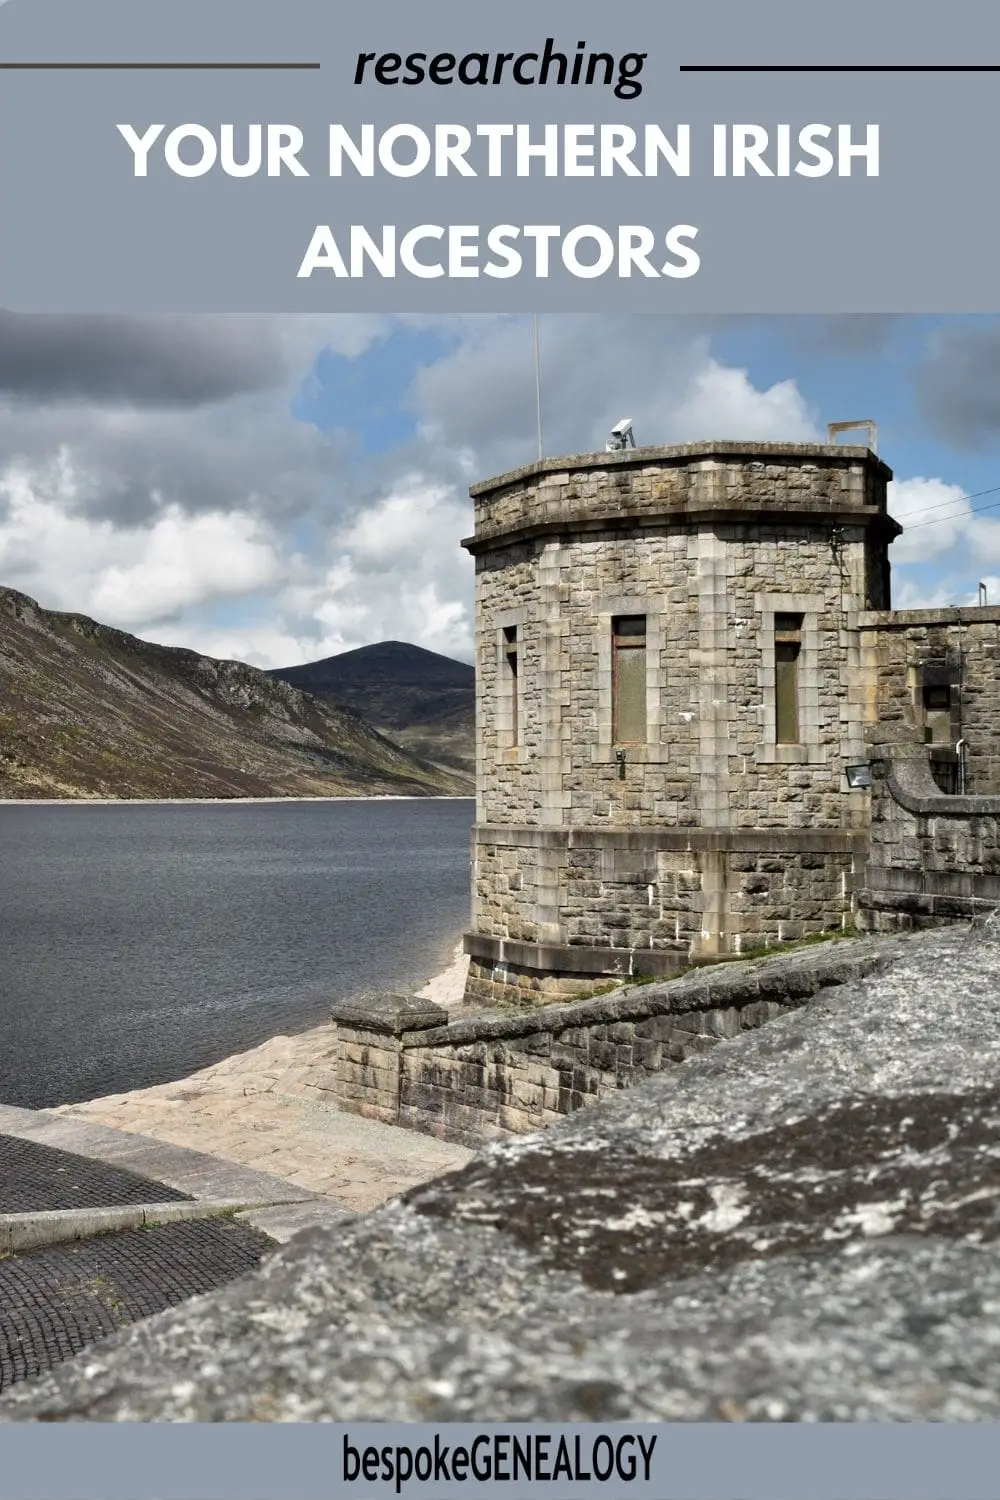 Researching your Northern Ireland ancestors. Photo of a remote reservoir in Northern Ireland.